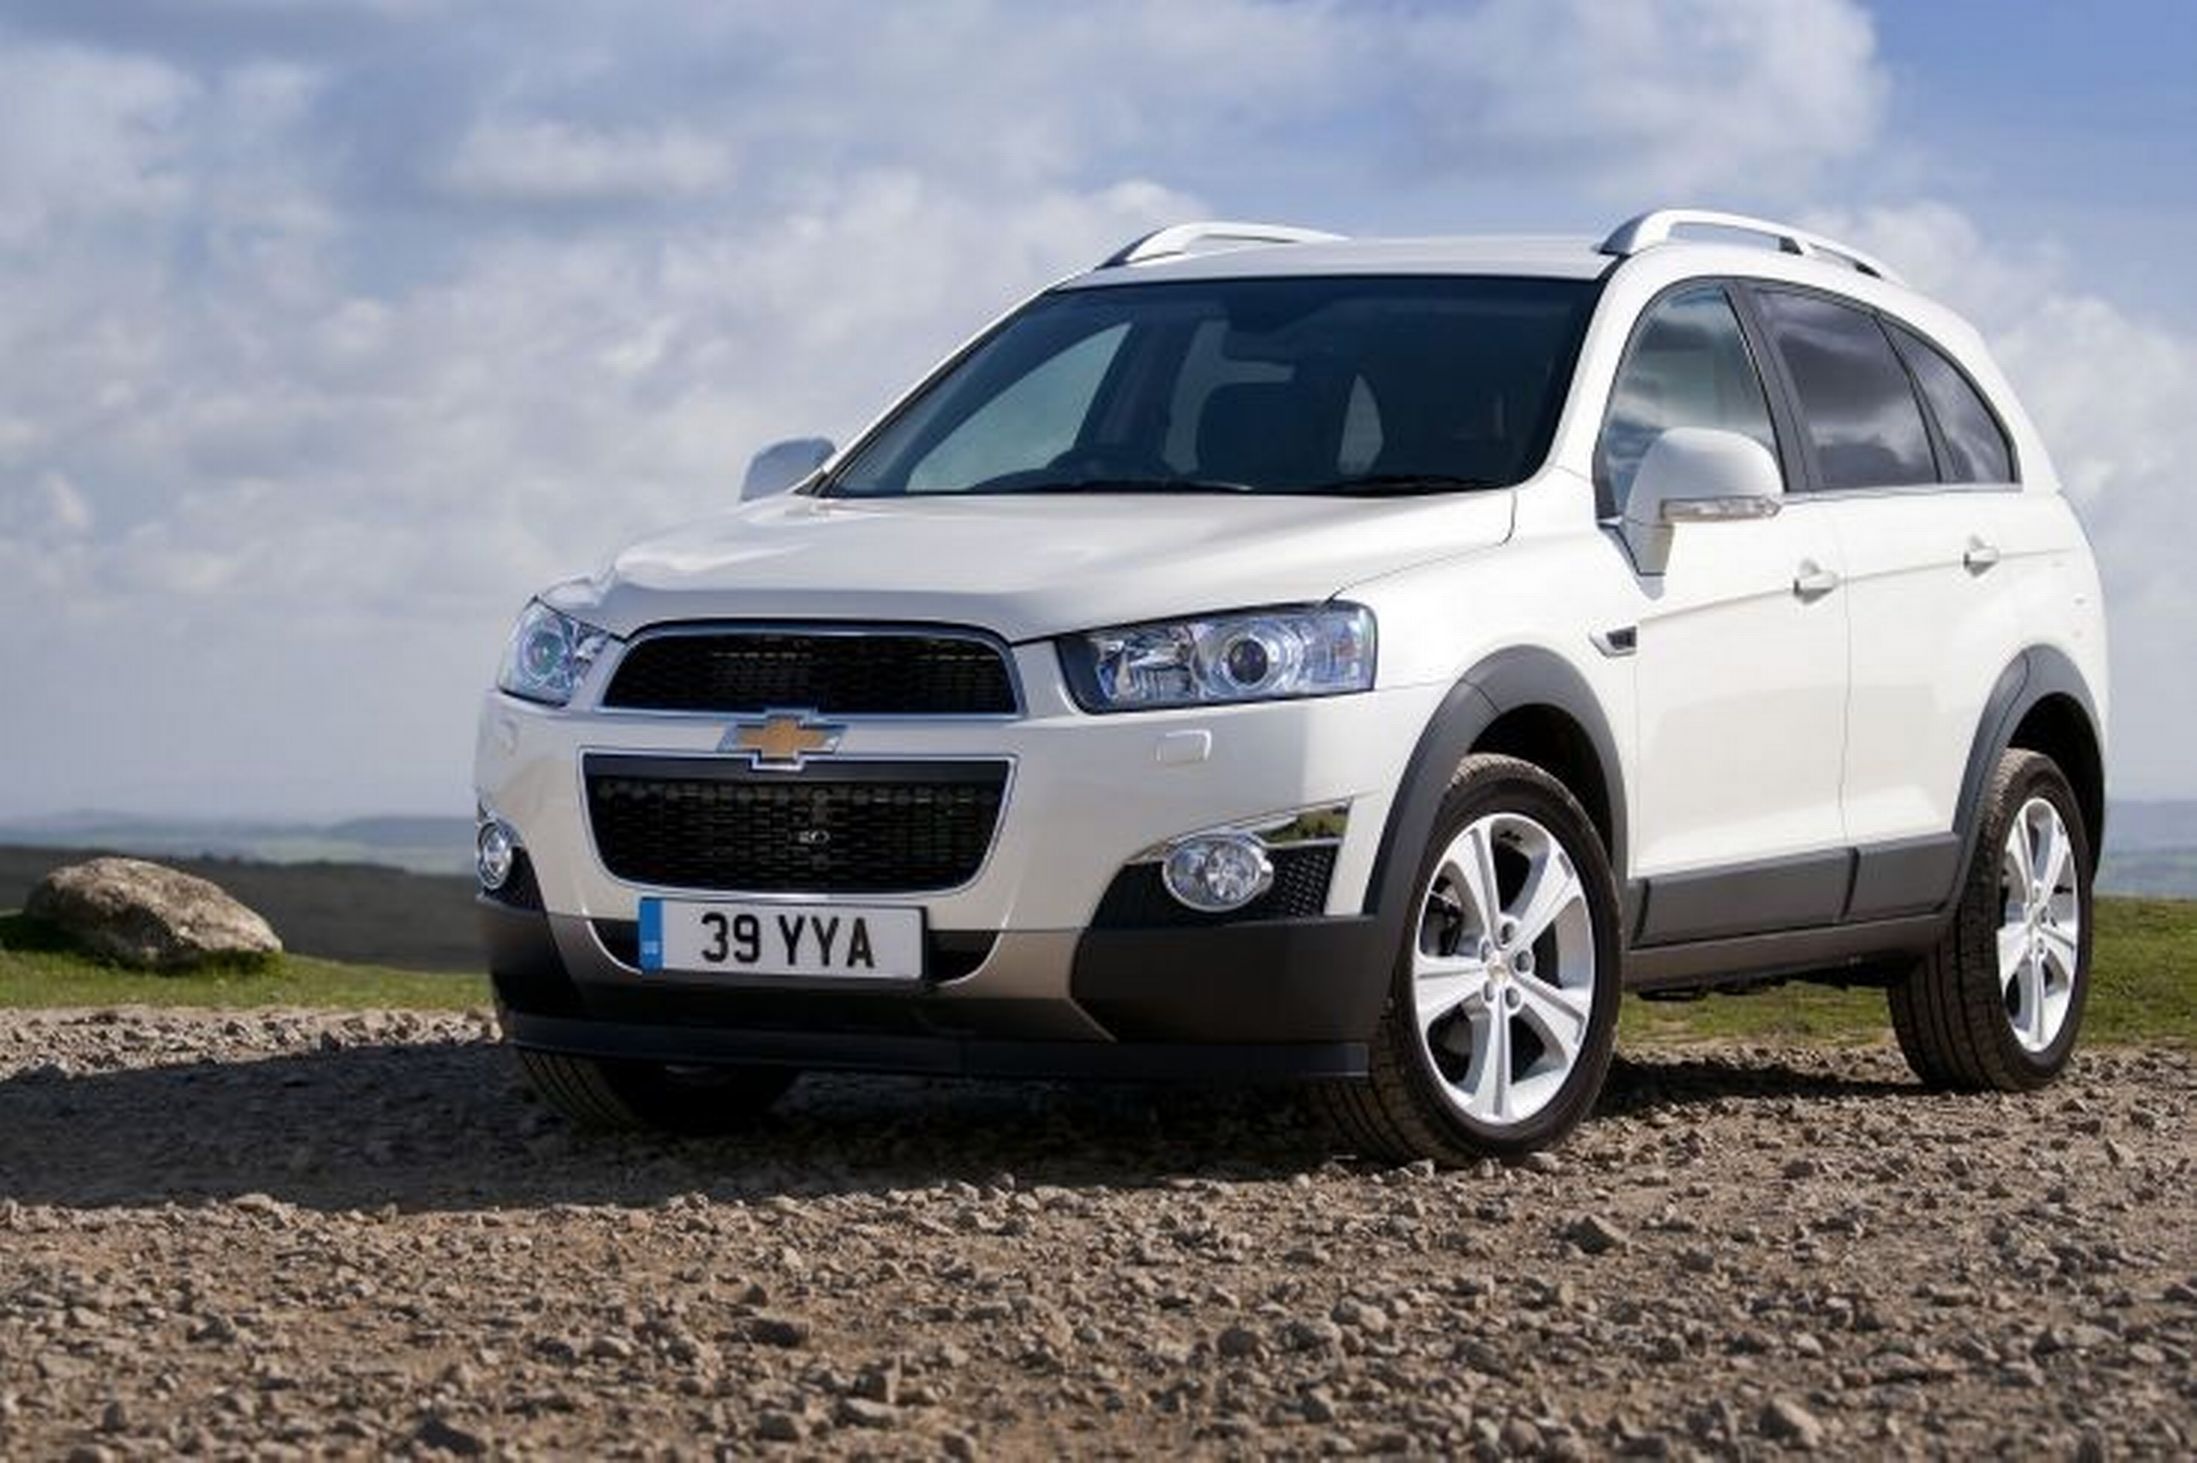 Reliable car Chevrolet Captiva 2014 wallpapers and images 